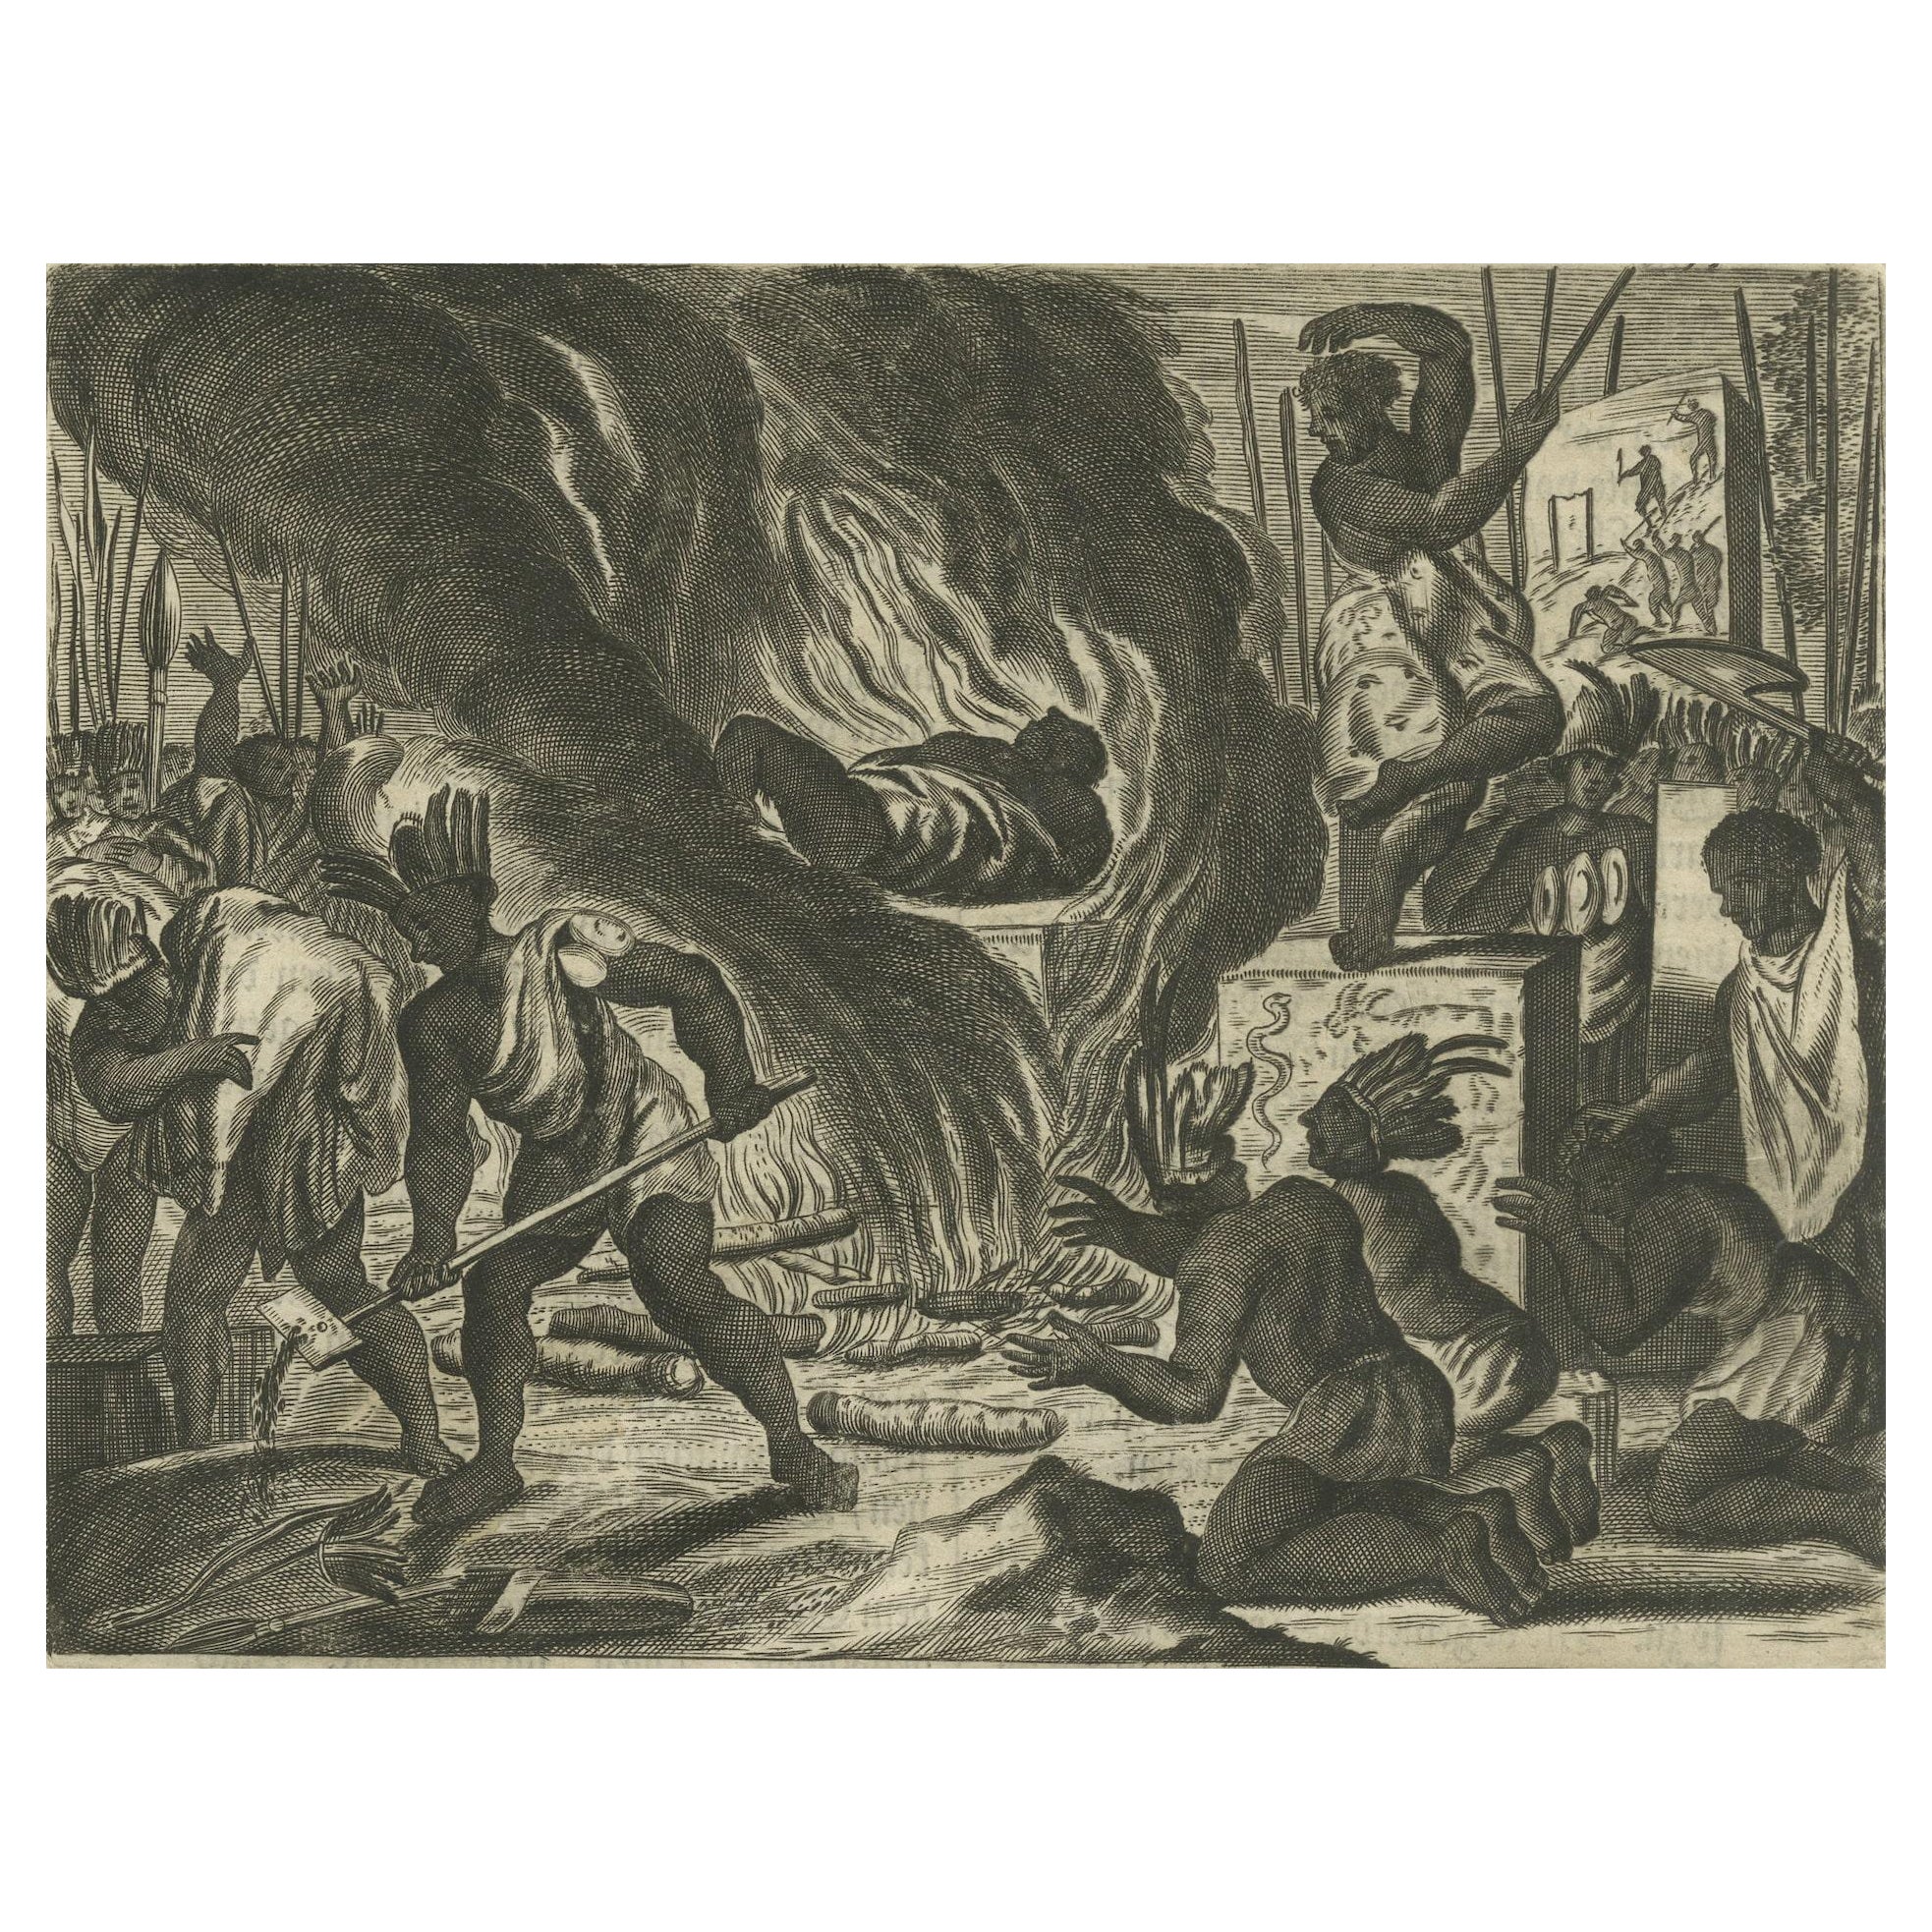 Engraving of Rituals and Cremation Ceremonies in New Spain by Montanus, 1673